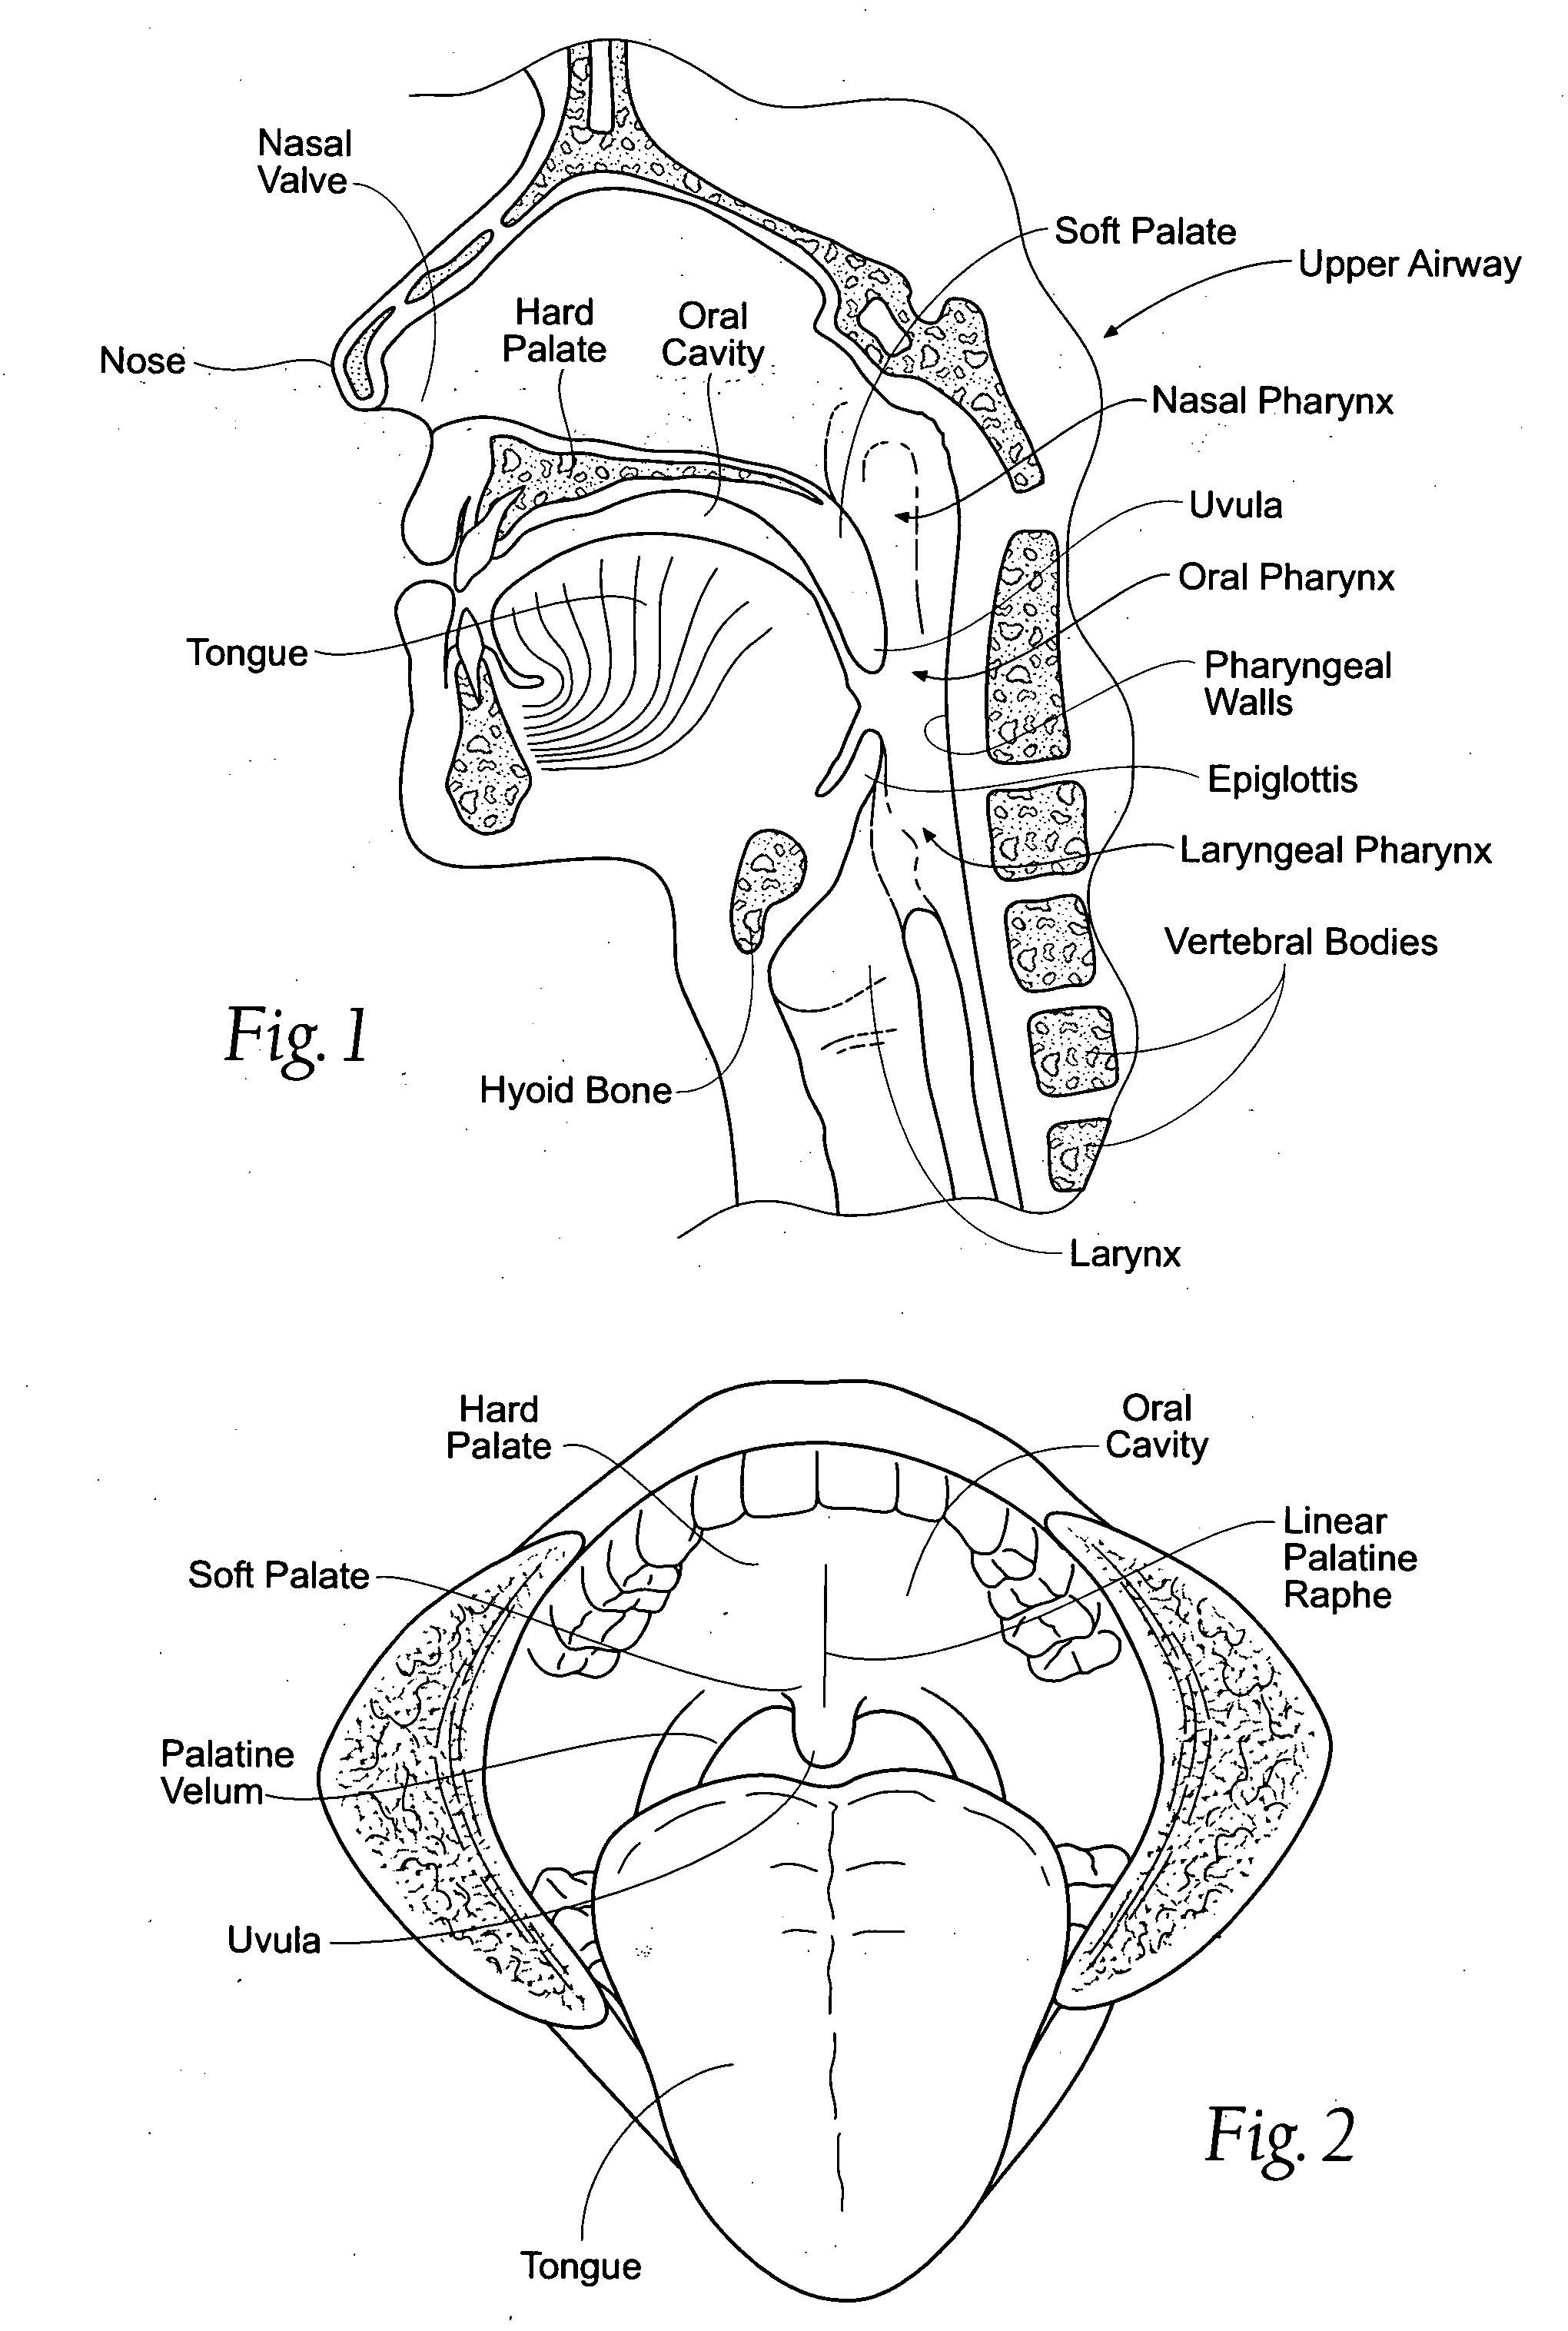 Devices, systems, and methods using magnetic force systems in or on tissue